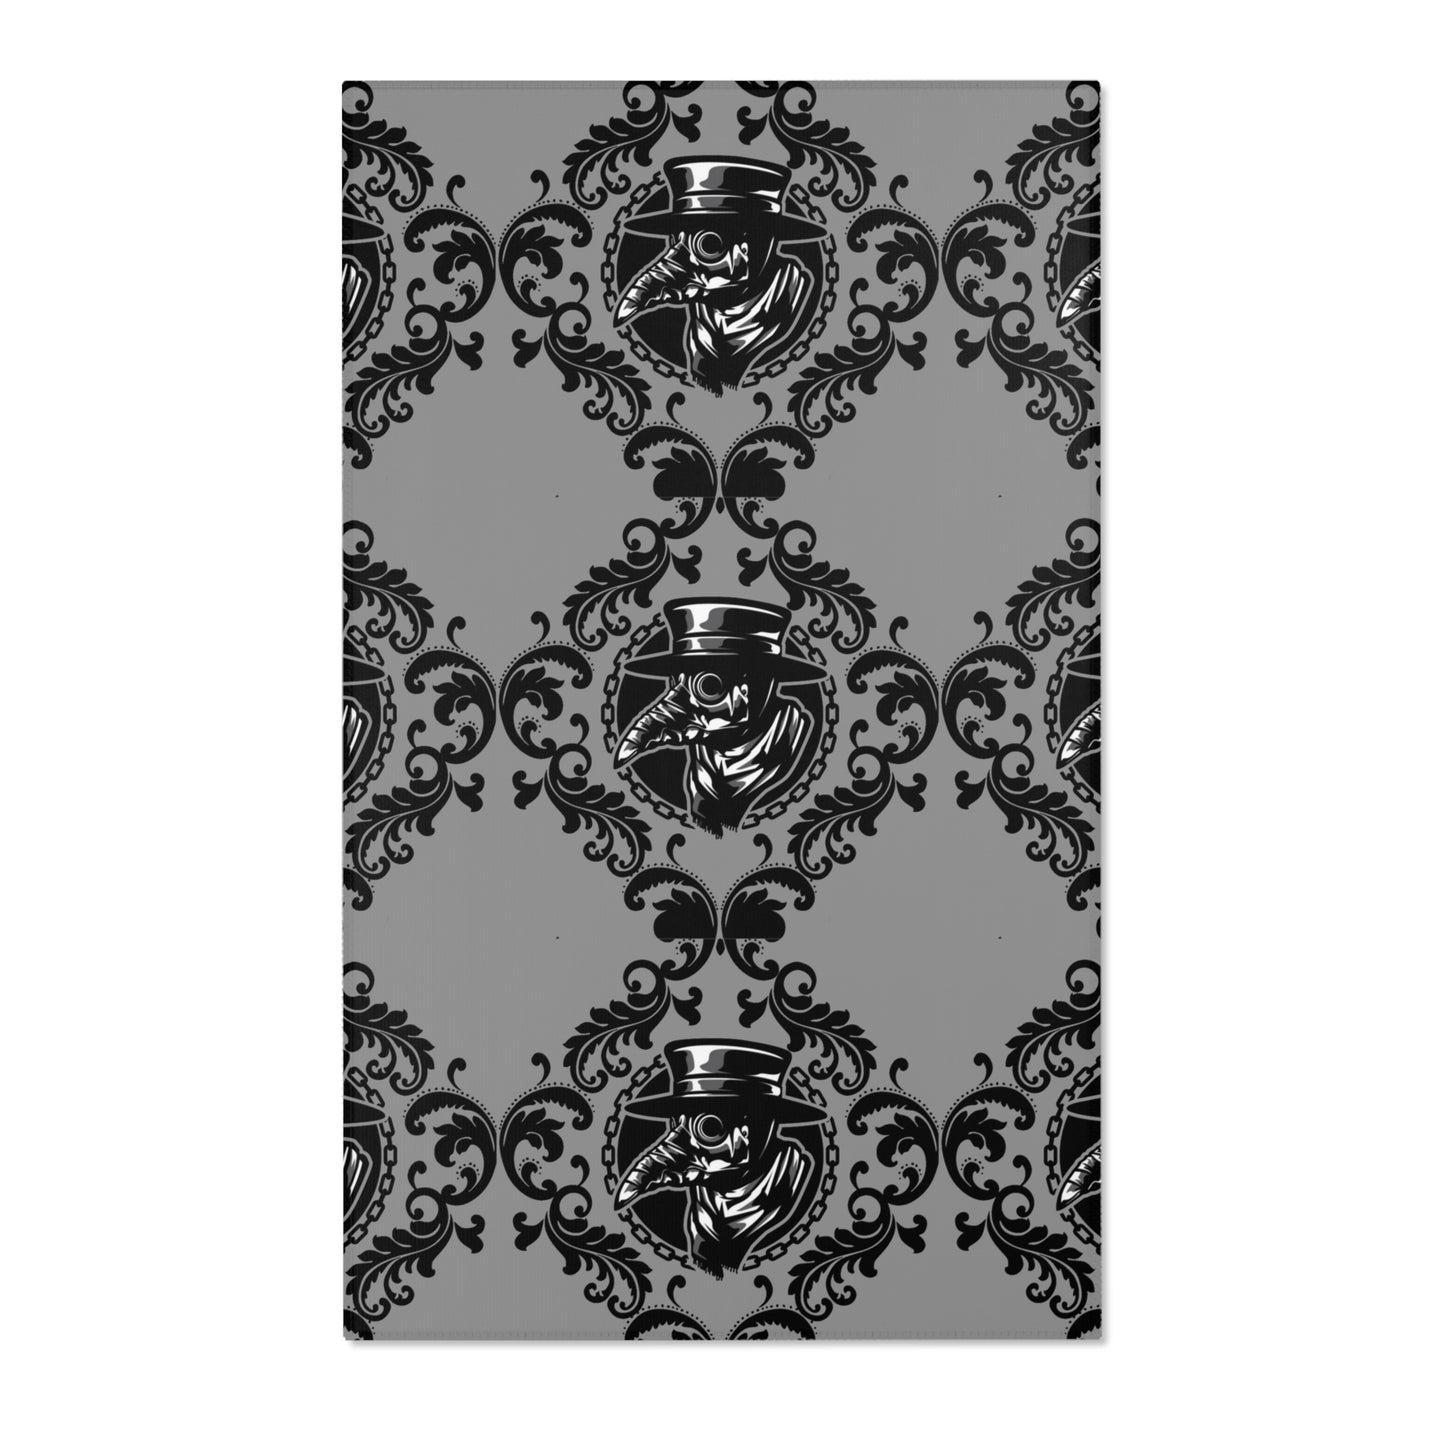 Plague Doctor Gothic Inspired Area Rug Lord and Lady Towers